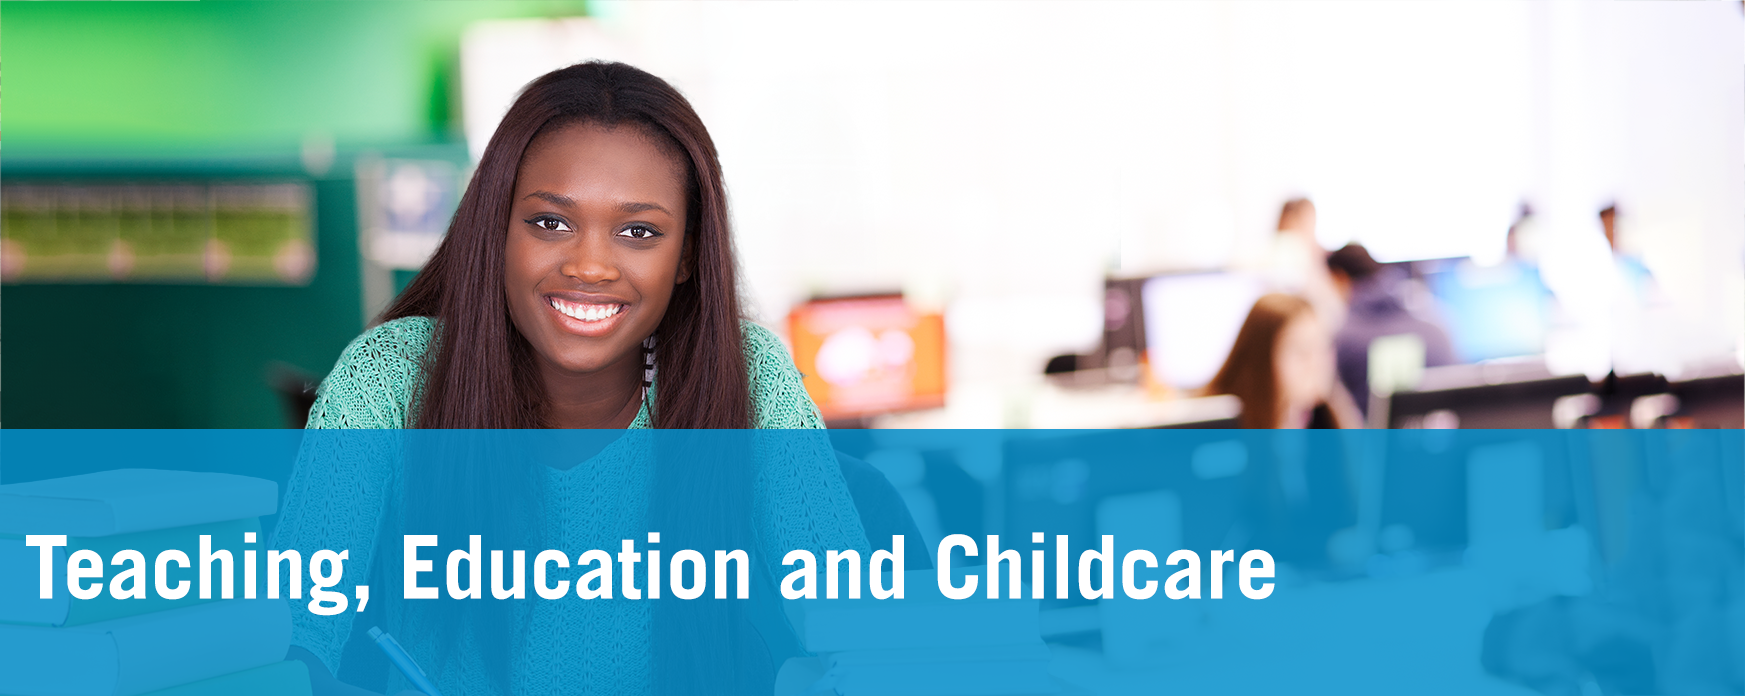 Teaching, Education and Childcare